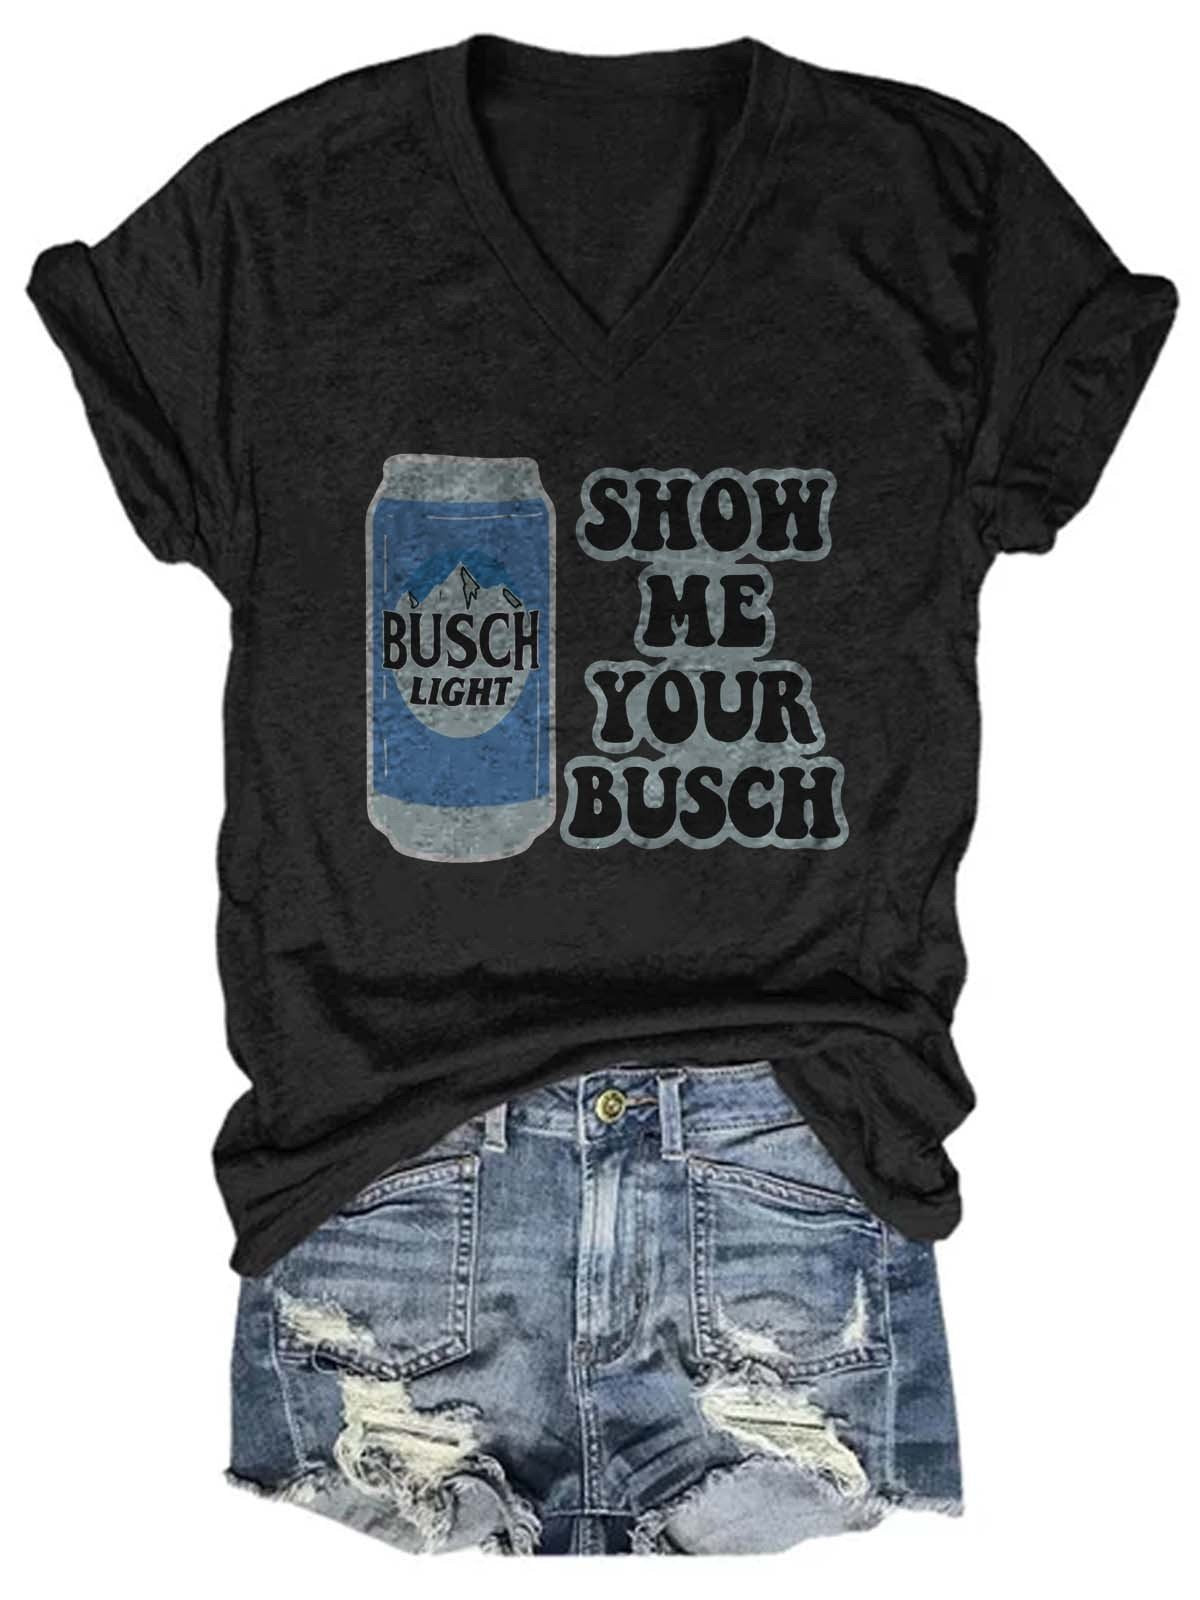 Women's Show Me Your Busch Tee - Outlets Forever